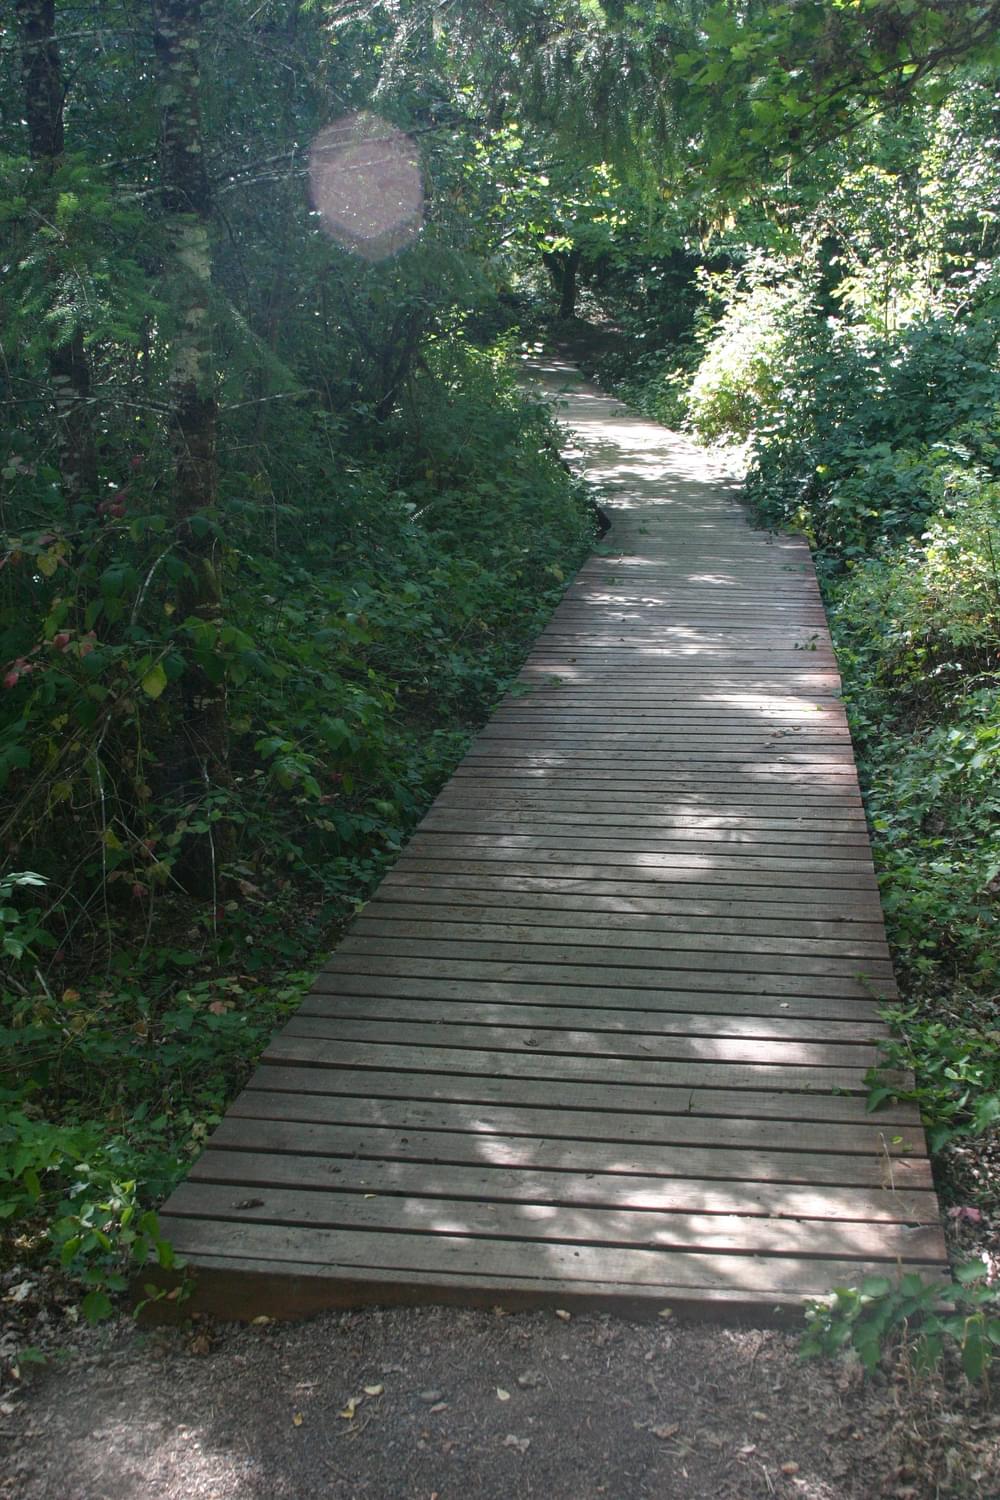 The classic problem on dirt trails where the bridge itself is above the trail grade. Surfacing materials wear away leaving a step; Woodpecker Loop Trail in Finley National Wildlife Refuge, Oregon